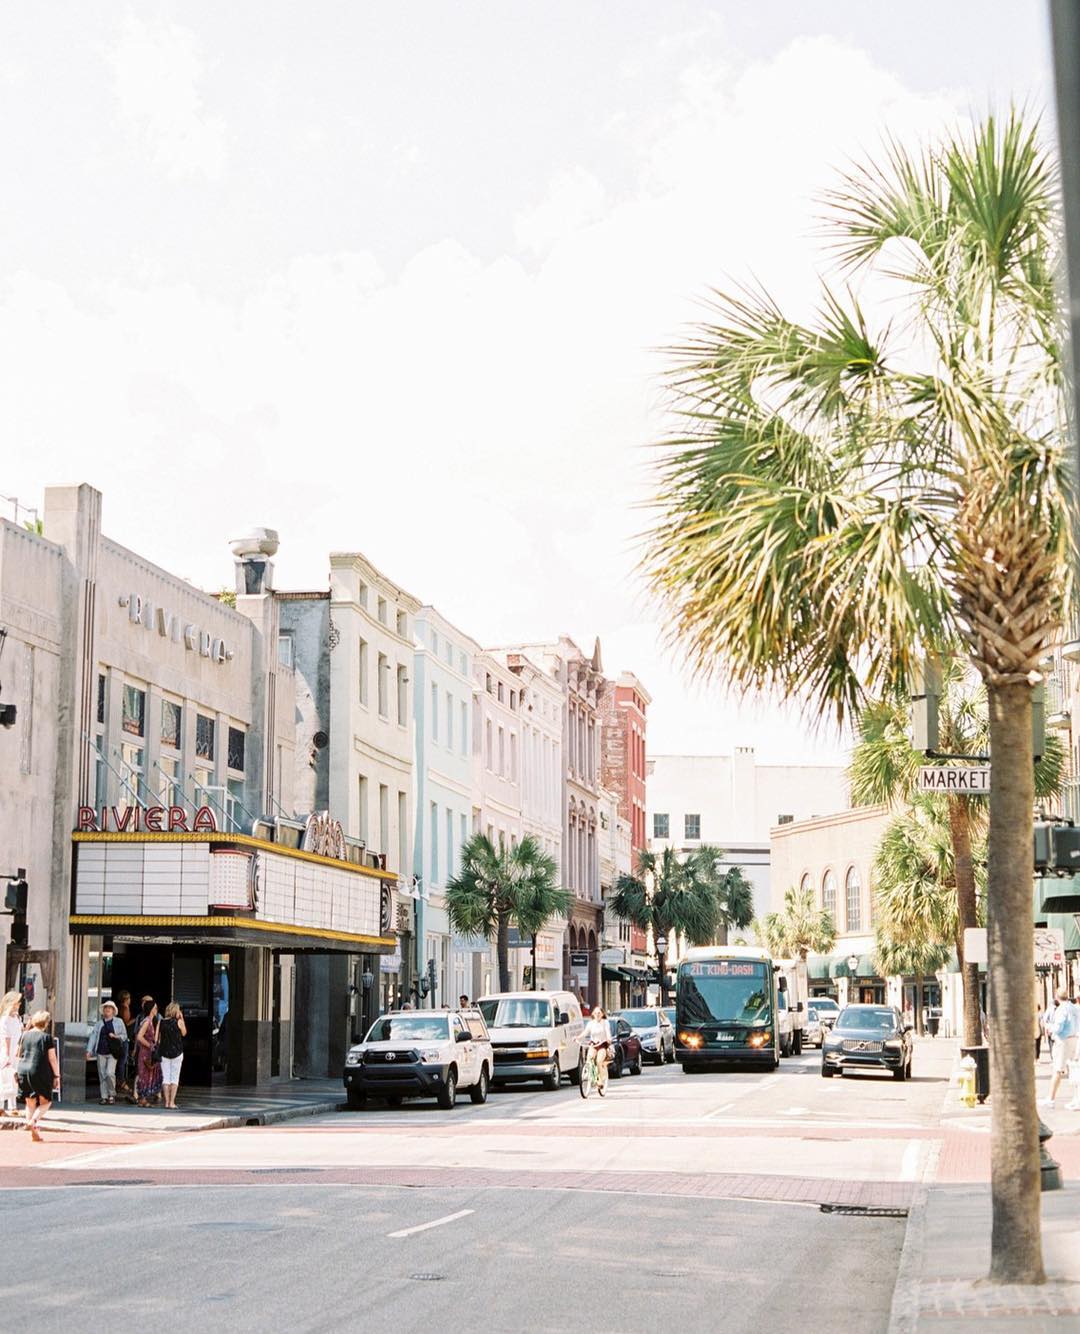 Looking down a downtown street in Charleston with people and cars. Photo by Instagram user @ashleyschurchphotography